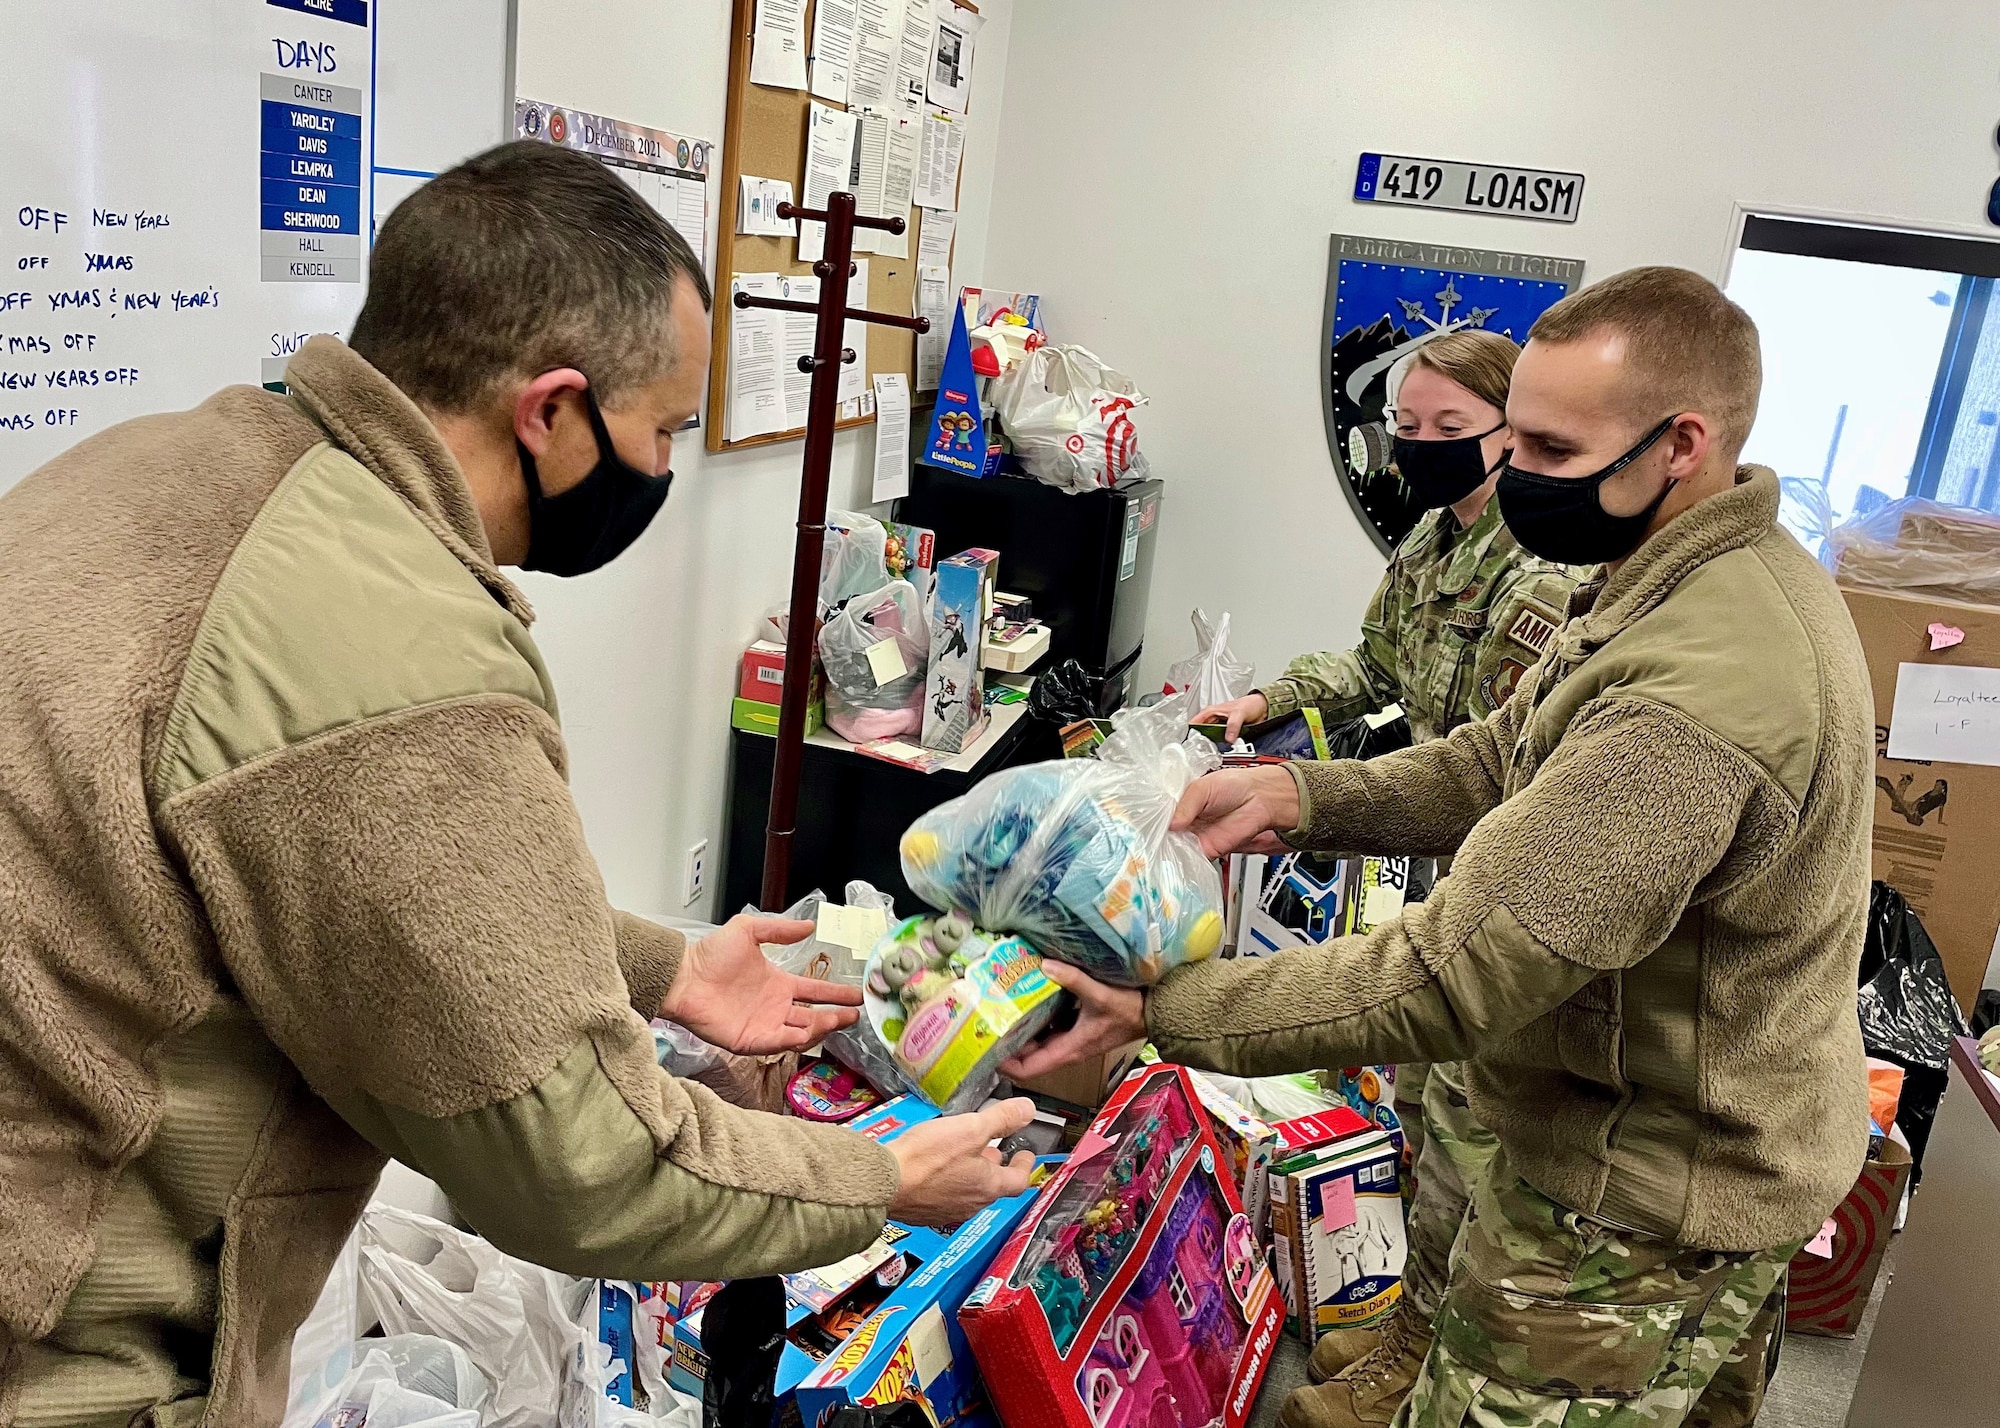 Master Sgt. Andrew Gale (left), reservist in the 419th Maintenance Squadron, helps organize toys alongside Tech. Sgt. Rachel Shelly and Tech. Sgt. Robert Spear as part of the “Santa Brigade” effort to deliver Christmas gifts to Utah children in foster care